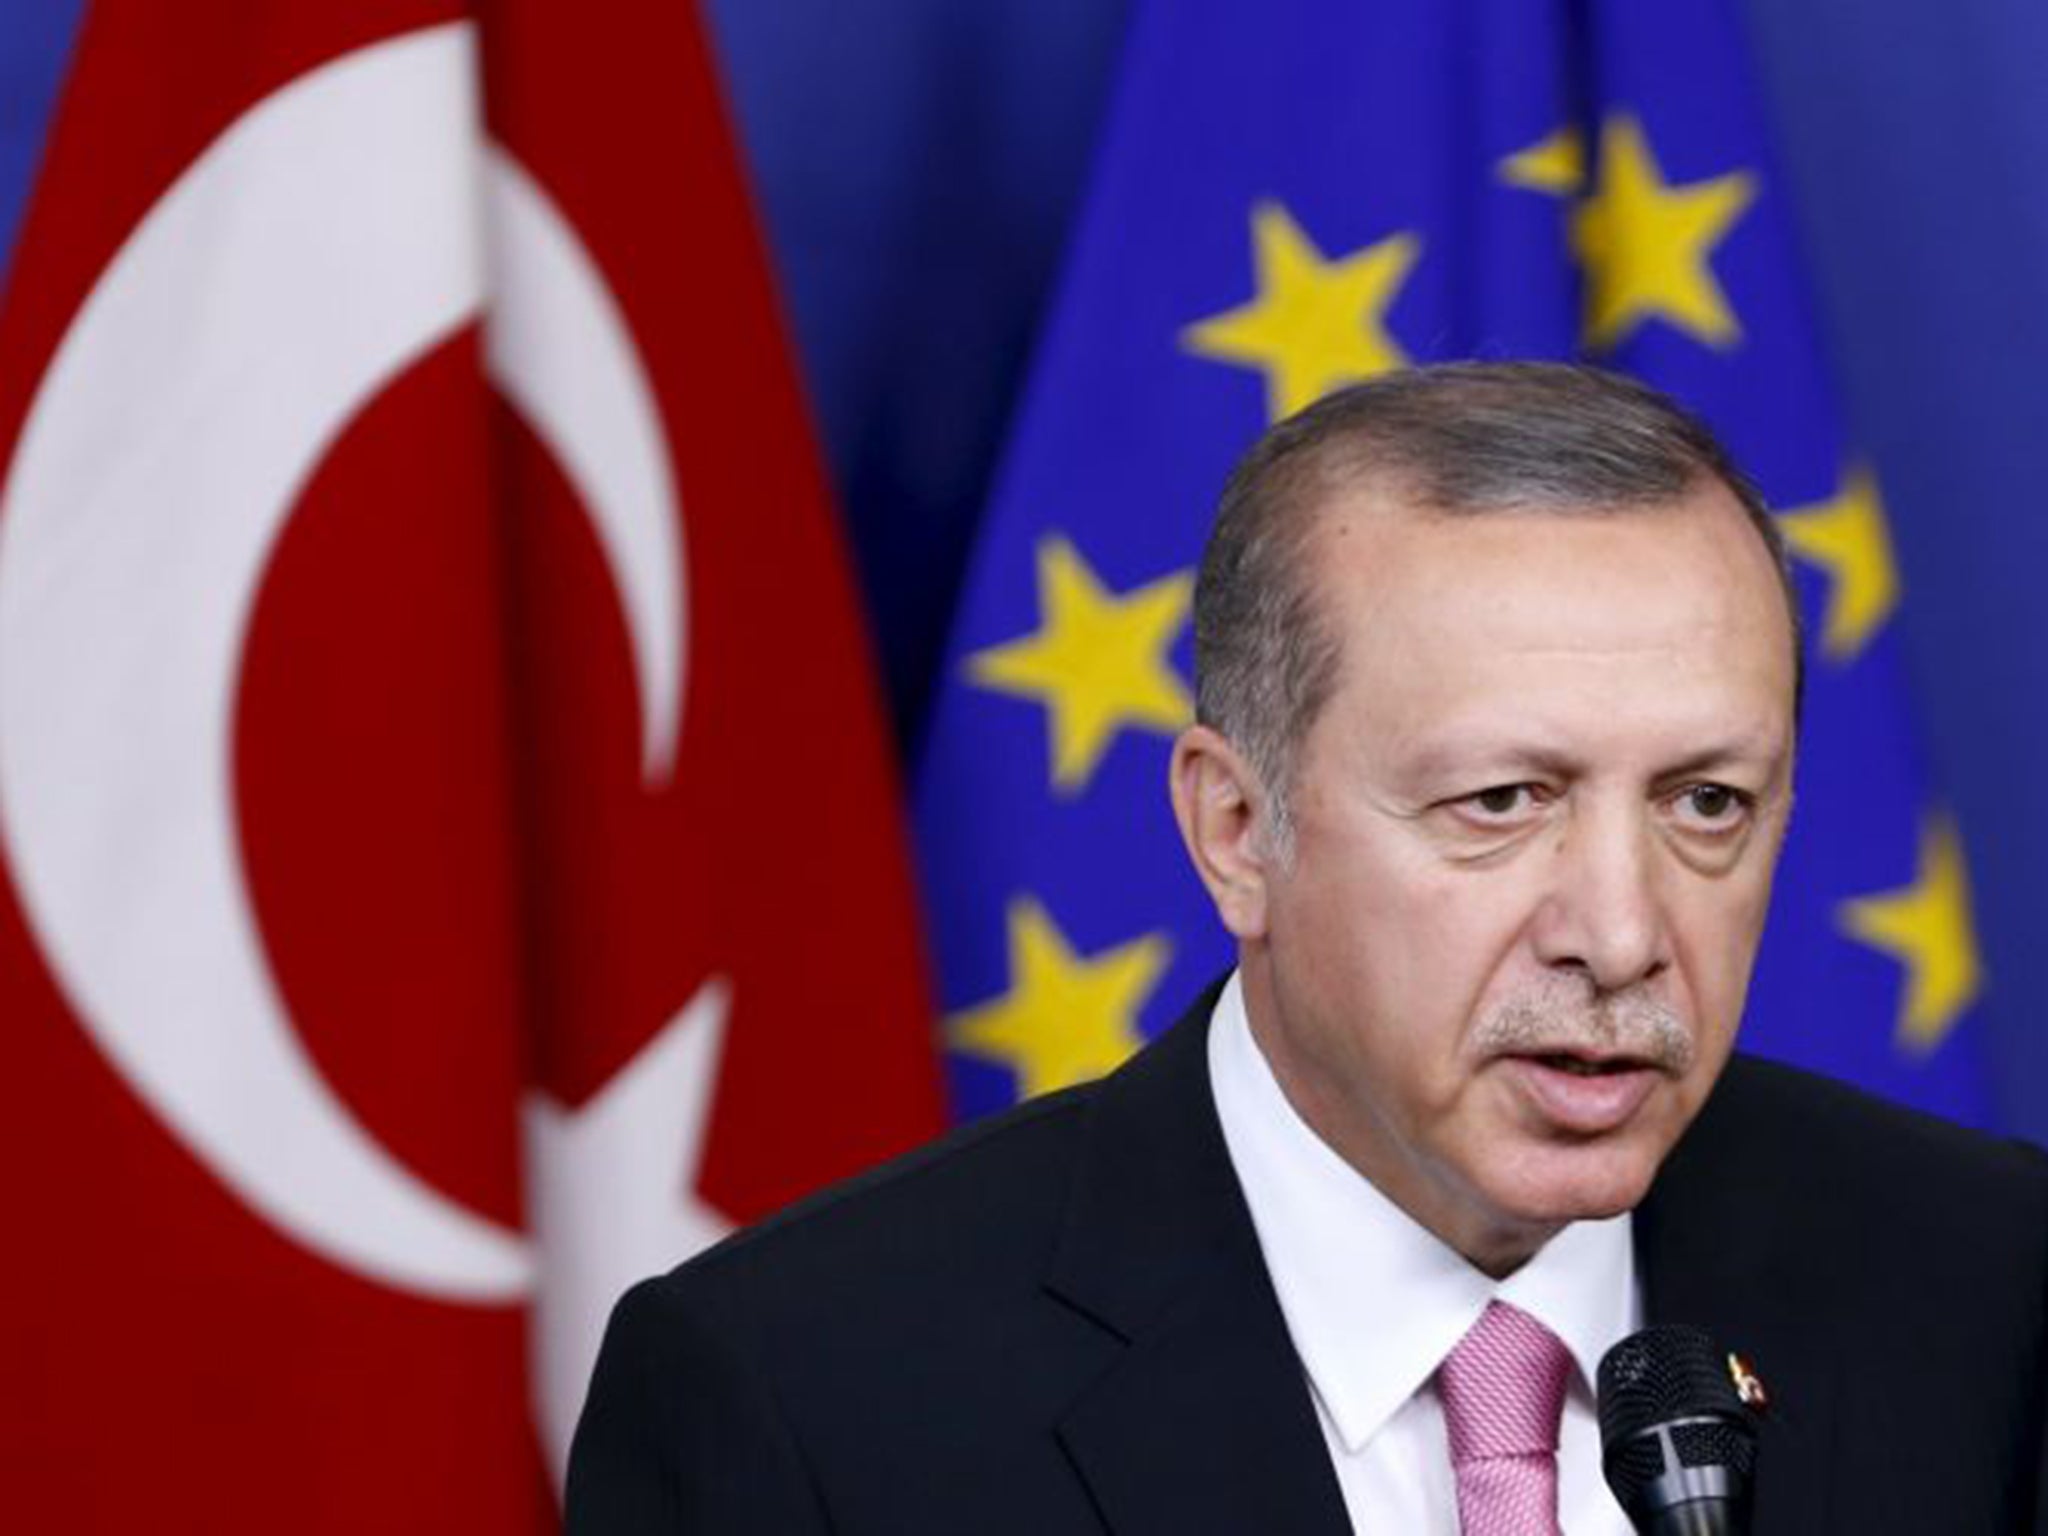 Turkey’s President Tayyip Erdogan, in Brussels, demanded the EU’s support for a ‘safe zone’ in northern Syria